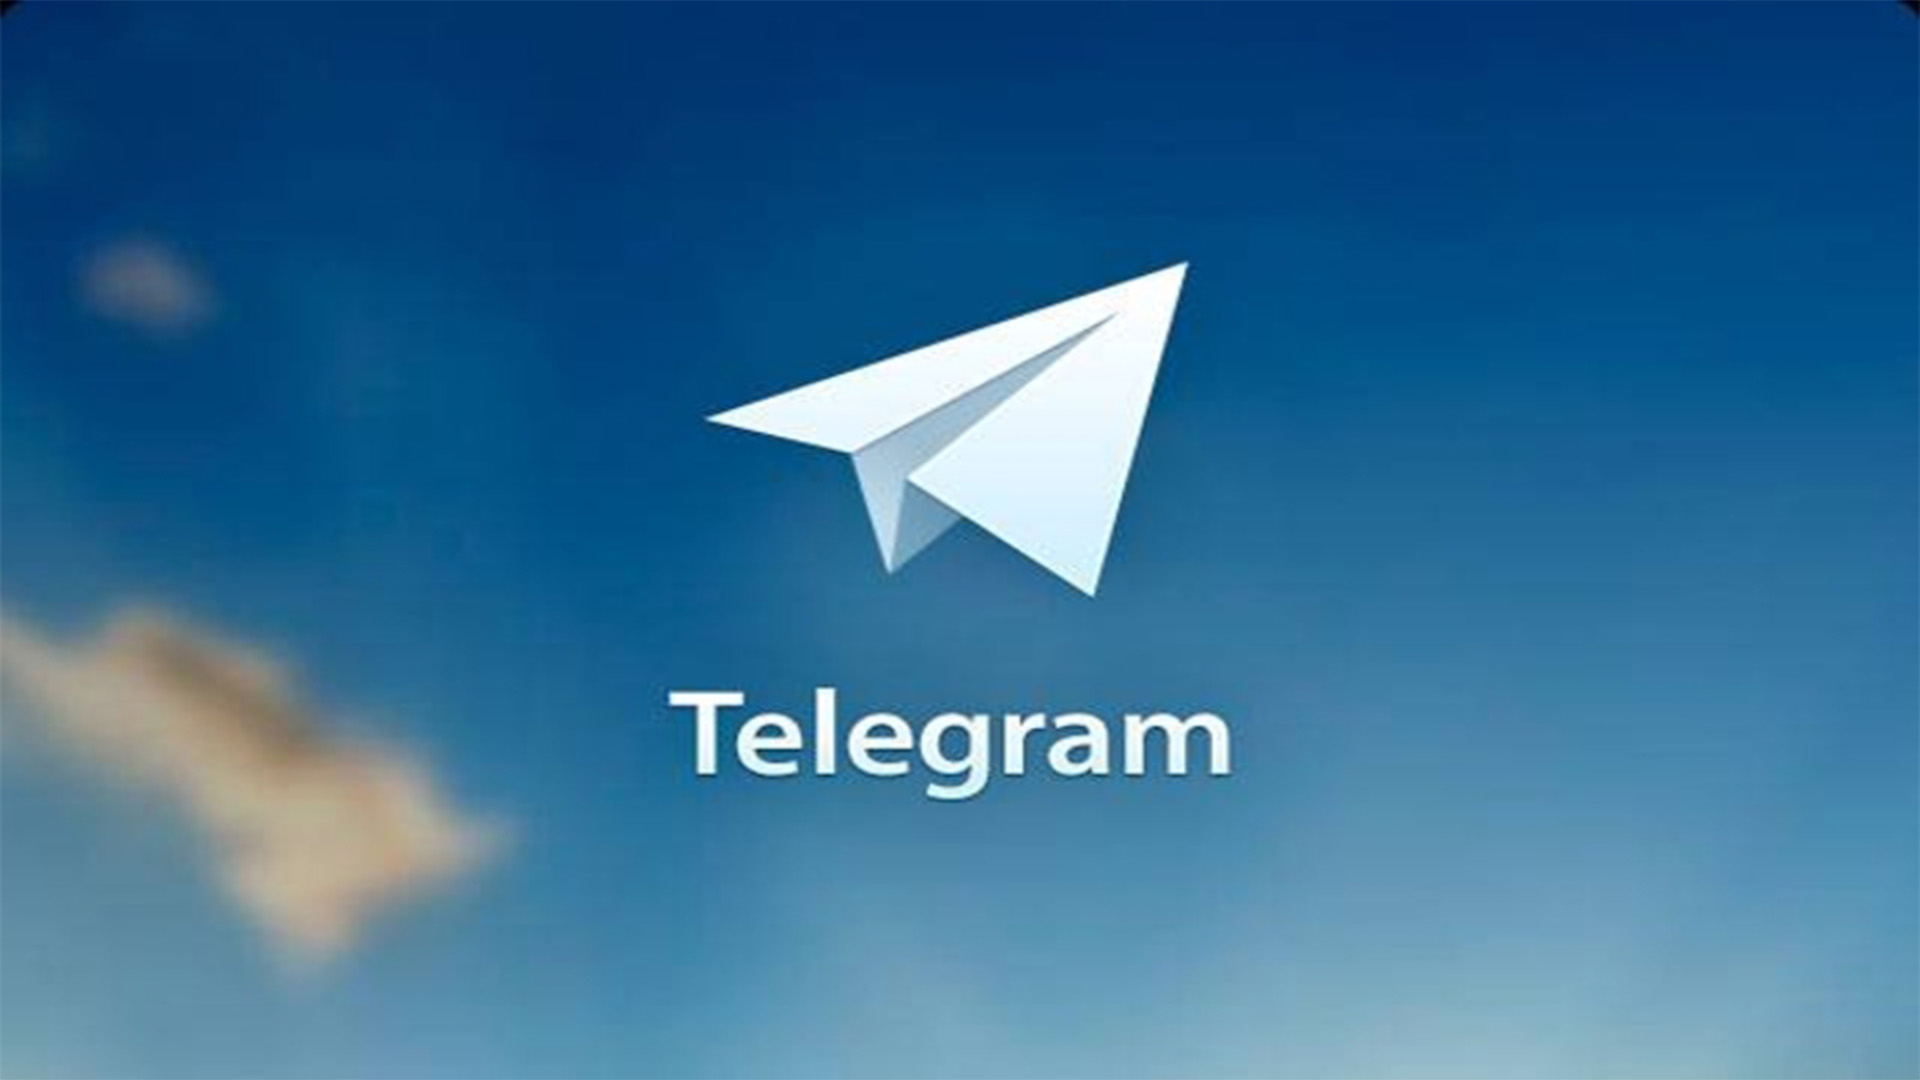 HOW TO FIND PEOPLE ON TELEGRAM?